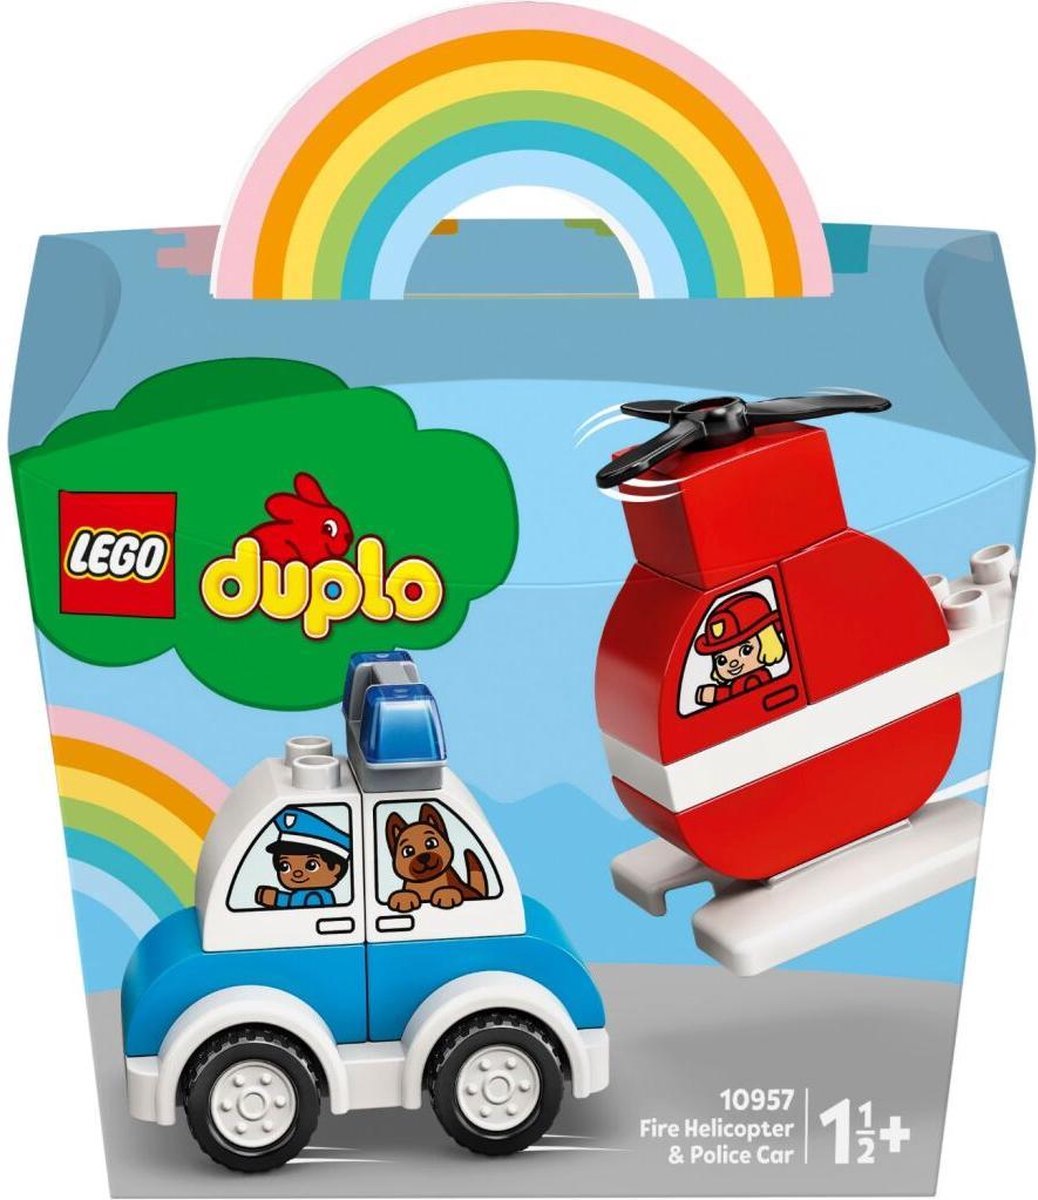 Lego Duplo 10957 Fire Helicopter & Police Car - LEGO